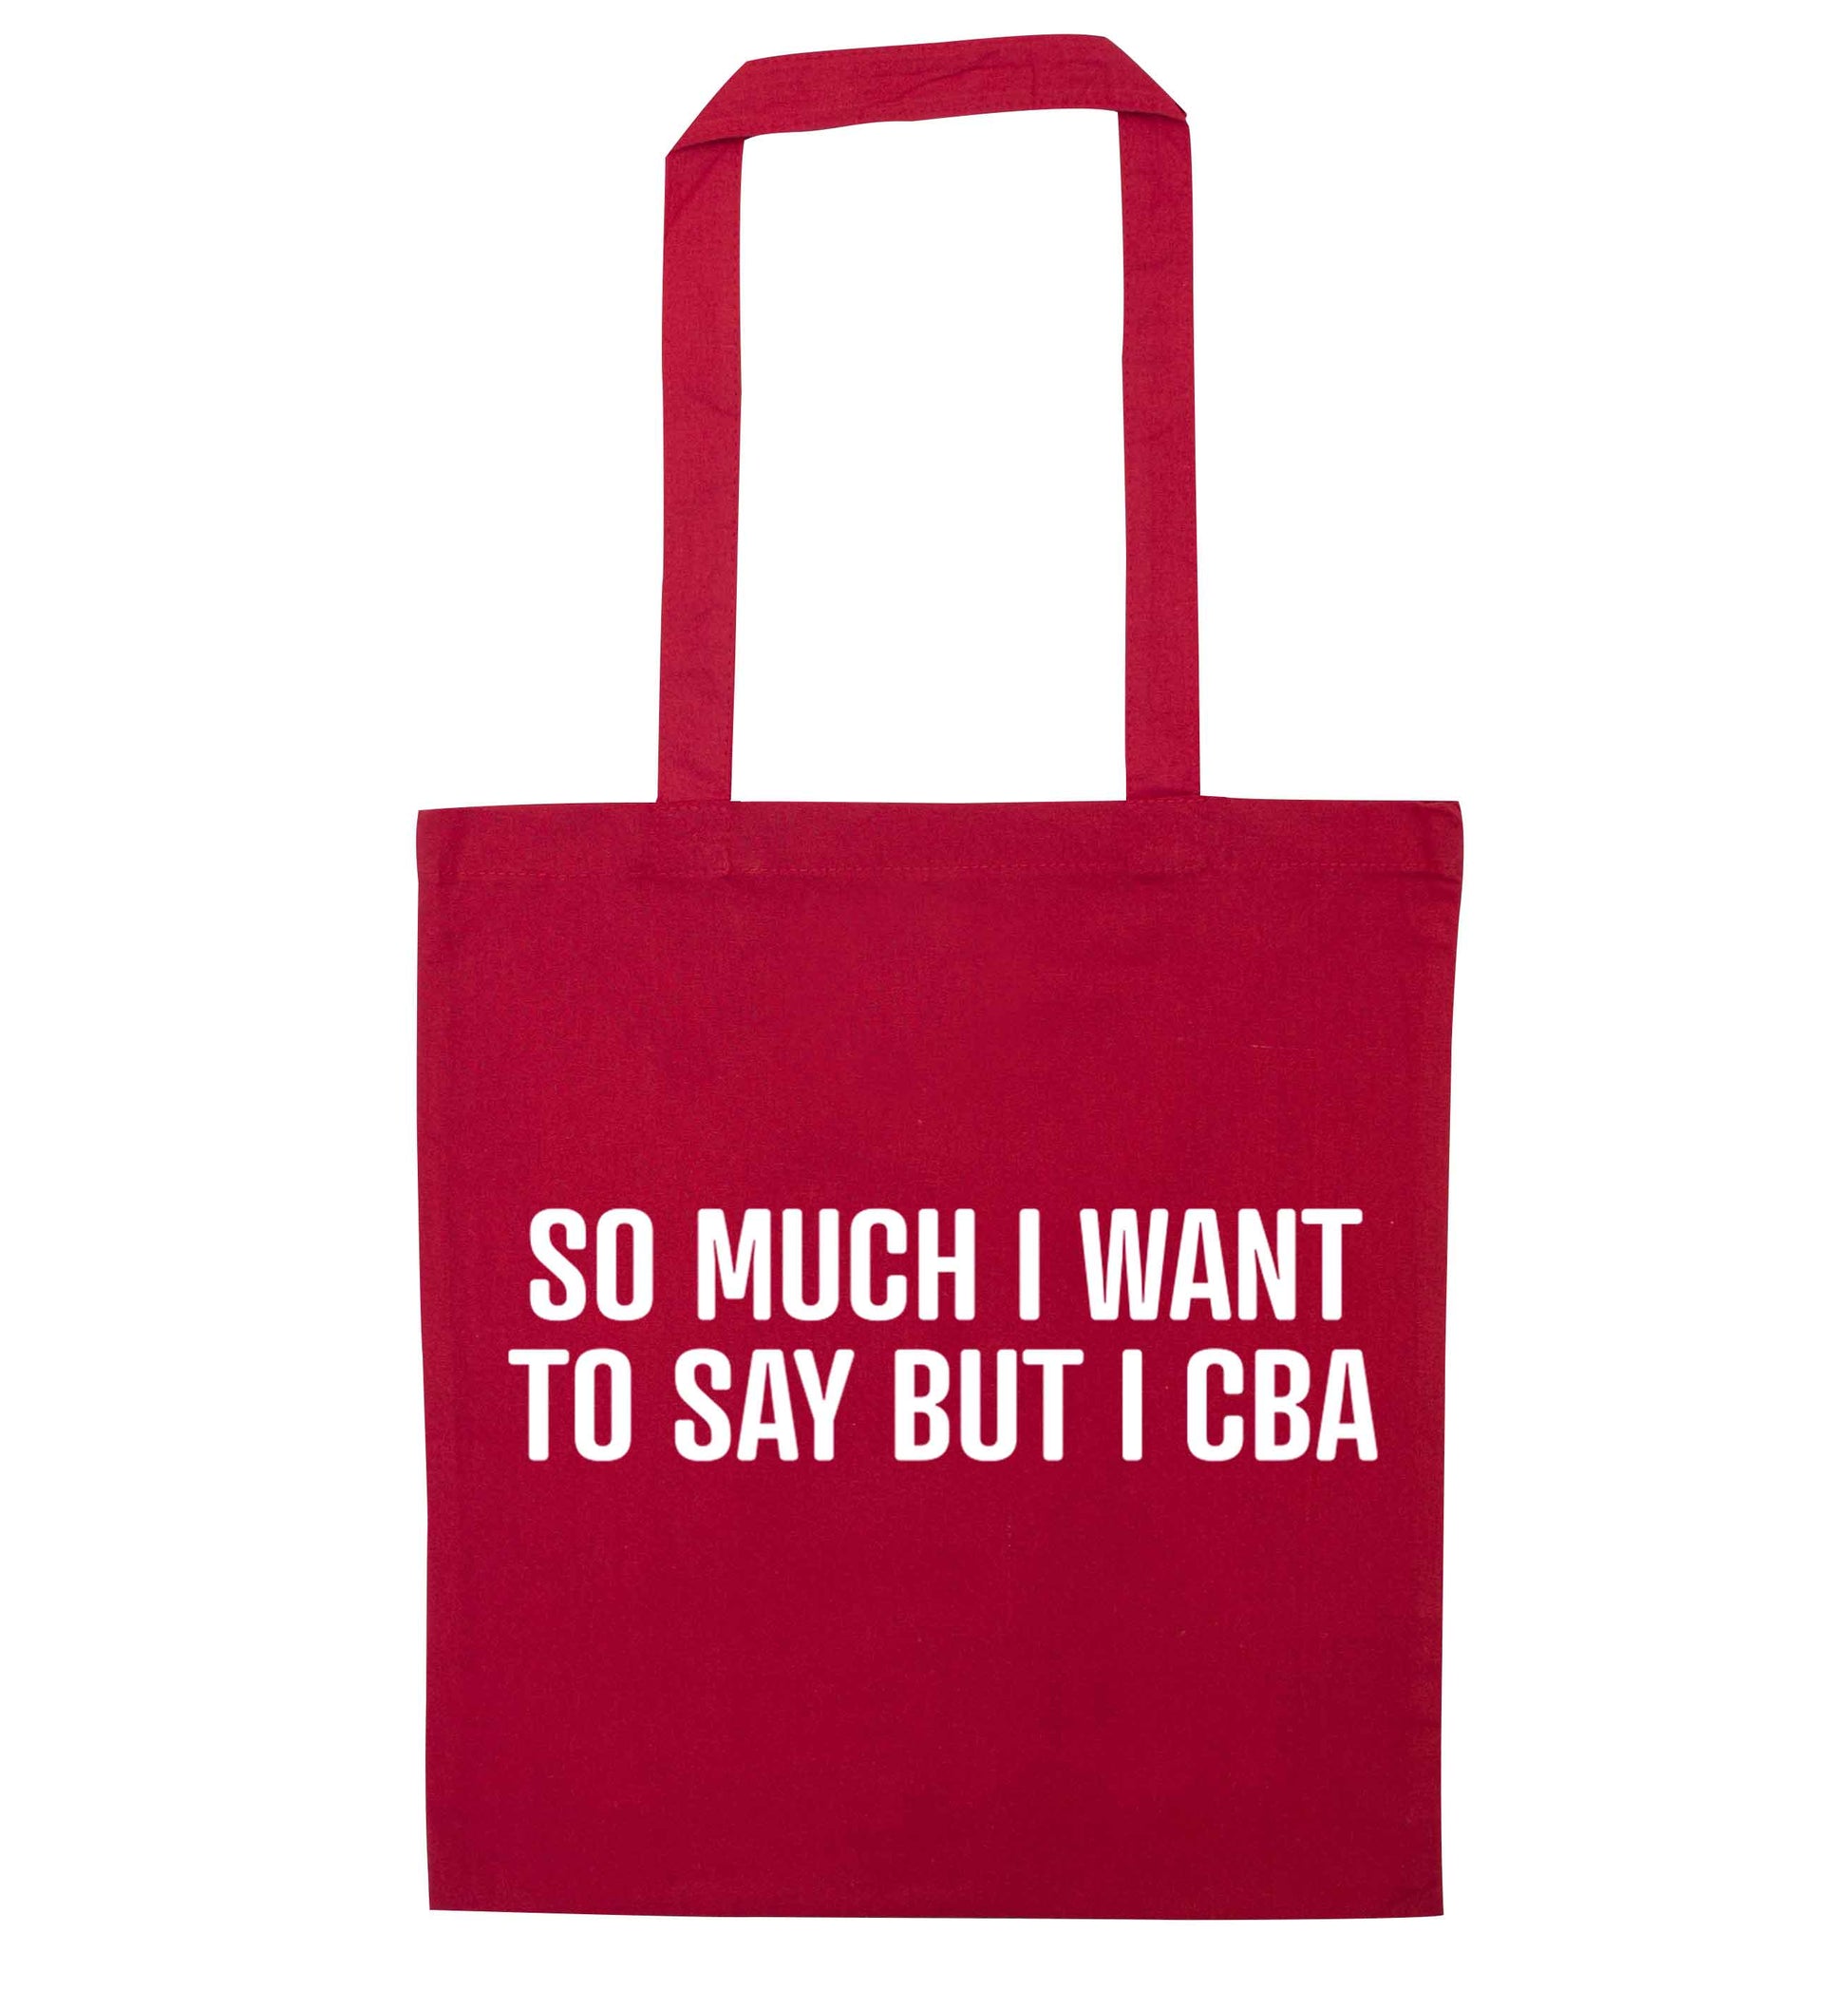 So much I want to say I cba  red tote bag